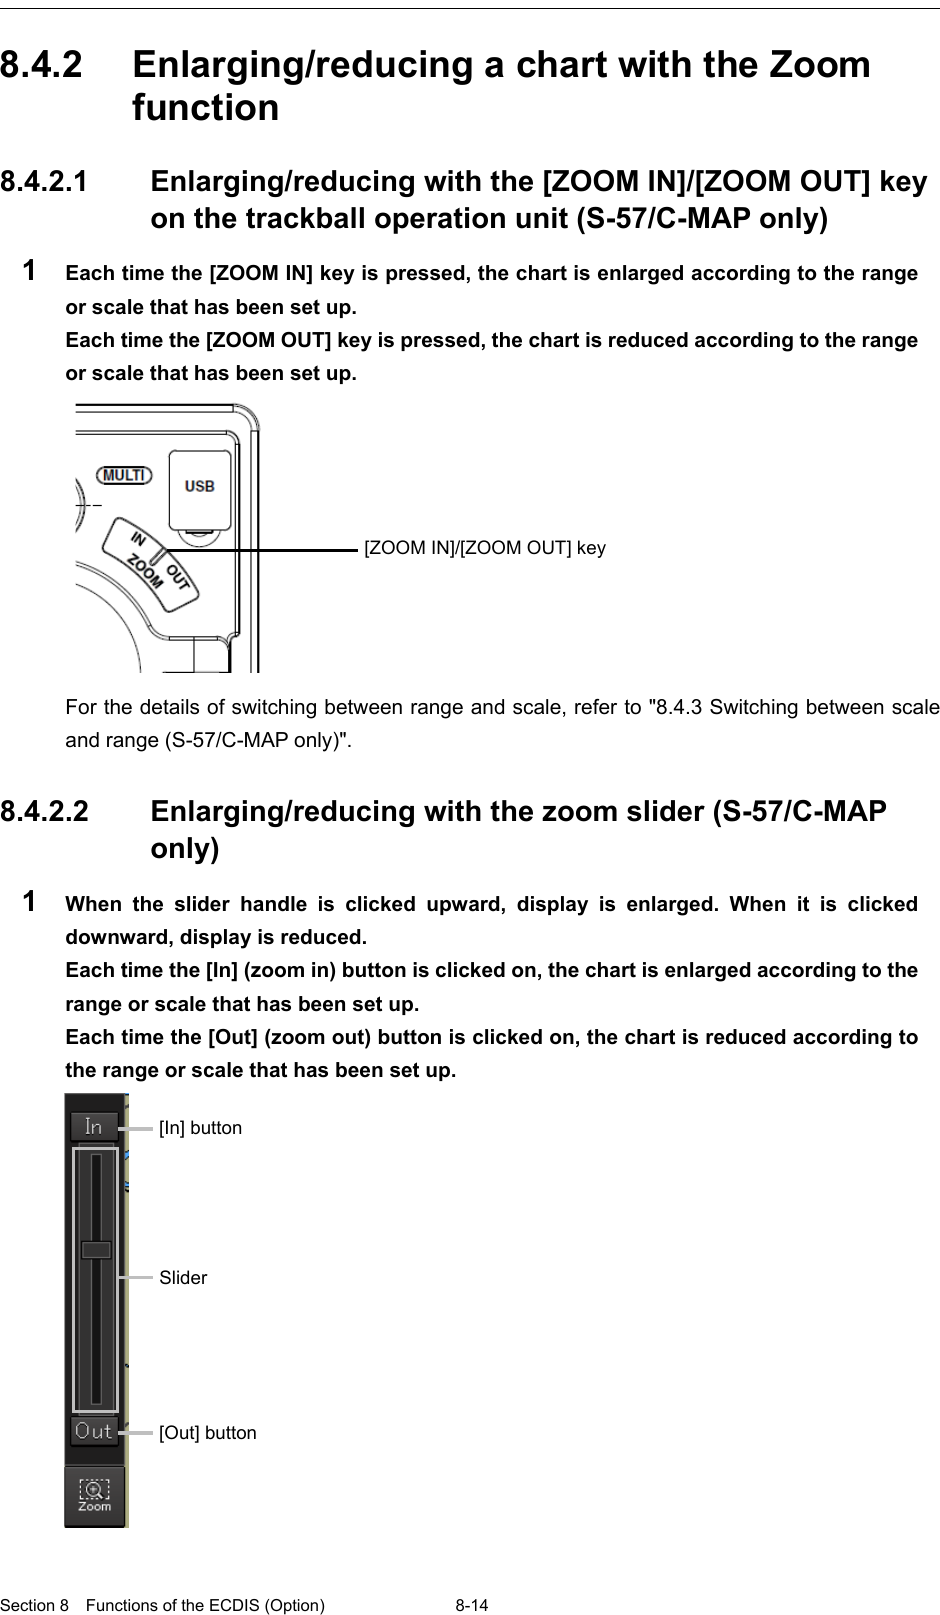  Section 8  Functions of the ECDIS (Option) 8-14  8.4.2 Enlarging/reducing a chart with the Zoom function    8.4.2.1 Enlarging/reducing with the [ZOOM IN]/[ZOOM OUT] key on the trackball operation unit (S-57/C-MAP only) 1  Each time the [ZOOM IN] key is pressed, the chart is enlarged according to the range or scale that has been set up.   Each time the [ZOOM OUT] key is pressed, the chart is reduced according to the range or scale that has been set up.  For the details of switching between range and scale, refer to &quot;8.4.3 Switching between scale and range (S-57/C-MAP only)&quot;.  8.4.2.2 Enlarging/reducing with the zoom slider (S-57/C-MAP only)   1  When the slider handle is clicked upward, display is enlarged. When it is clicked downward, display is reduced.   Each time the [In] (zoom in) button is clicked on, the chart is enlarged according to the range or scale that has been set up.   Each time the [Out] (zoom out) button is clicked on, the chart is reduced according to the range or scale that has been set up.    [ZOOM IN]/[ZOOM OUT] key [In] button  Slider [Out] button 